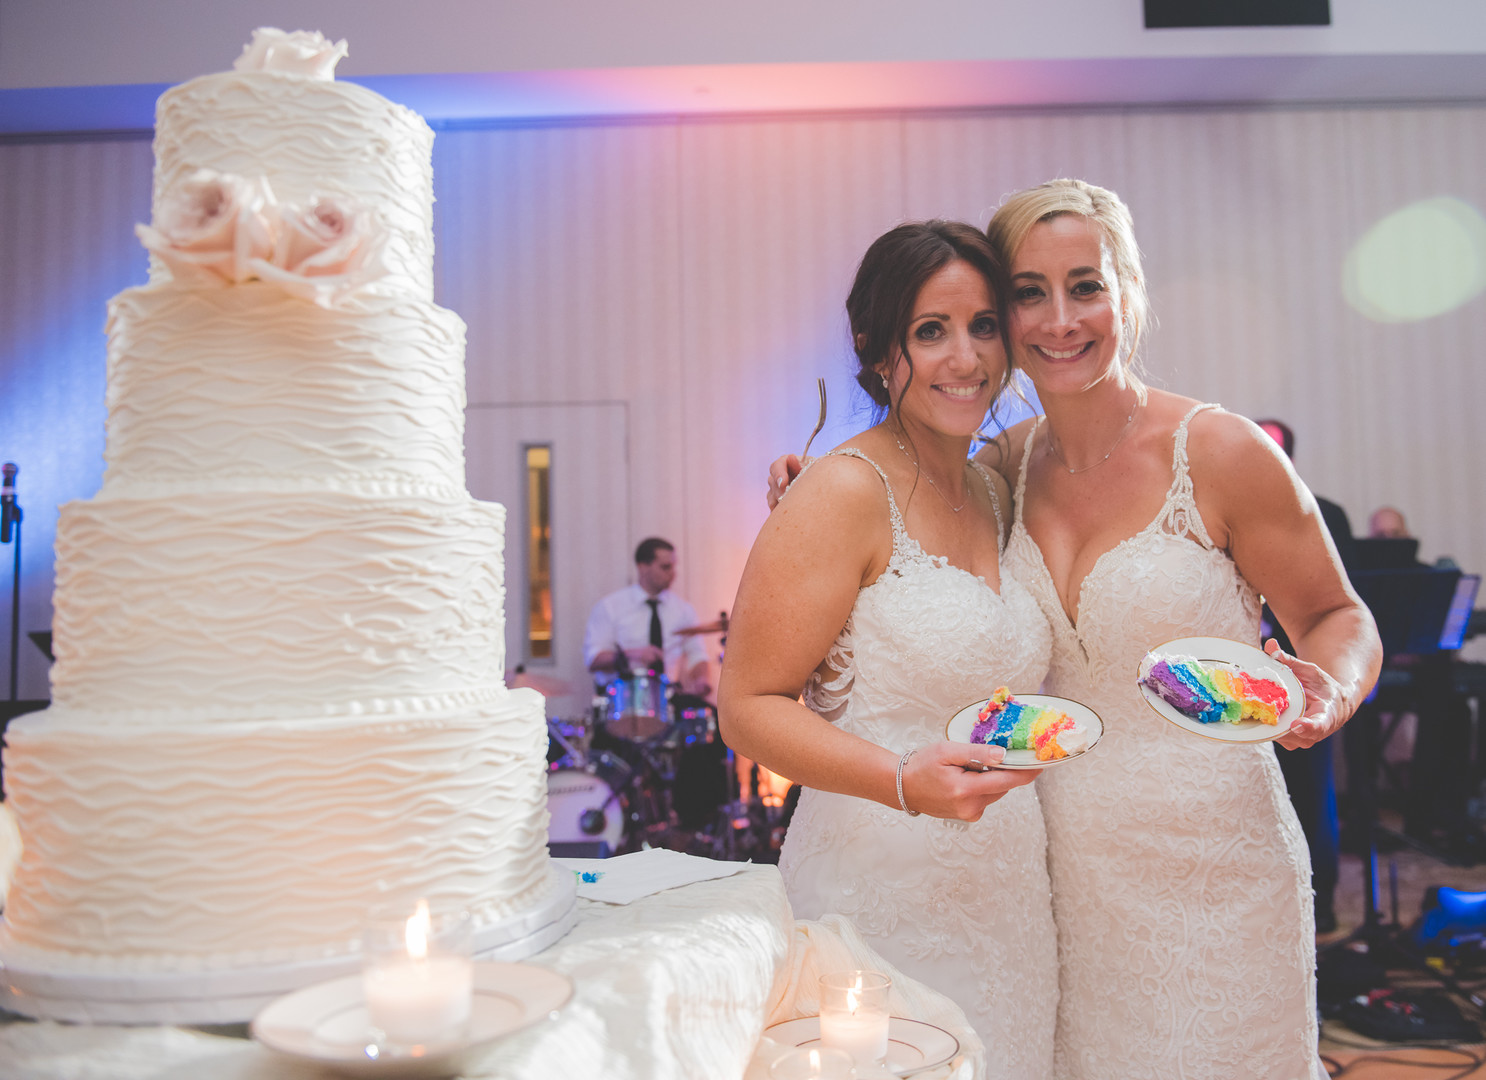 Traditional Jewish wedding during Pride Month two brides up-do long white lace dresses wedding cake rainbow